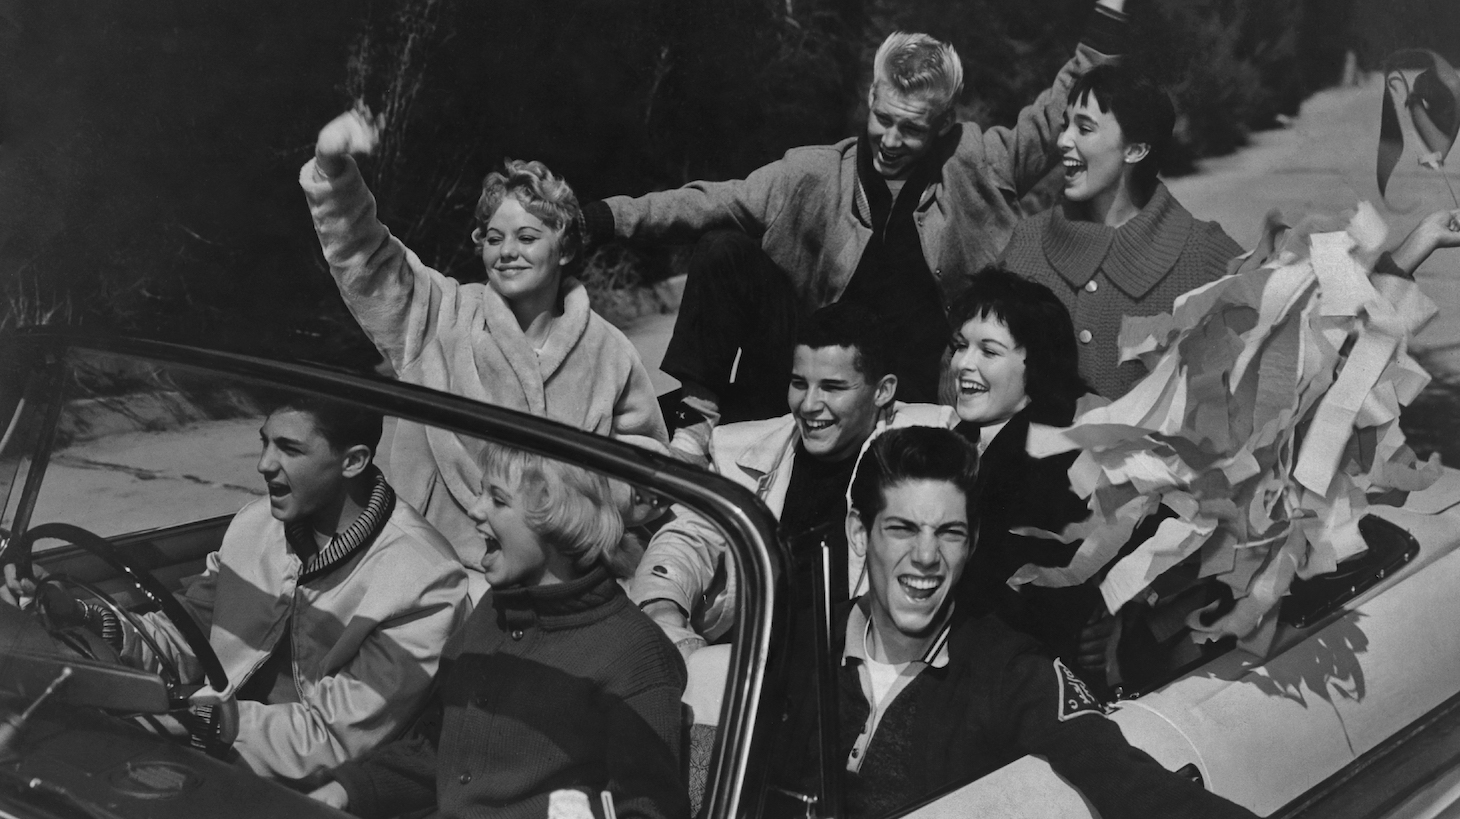 A group of teenagers having fun in a convertible car in the 1950's. (Photo by FPG/Getty Images)